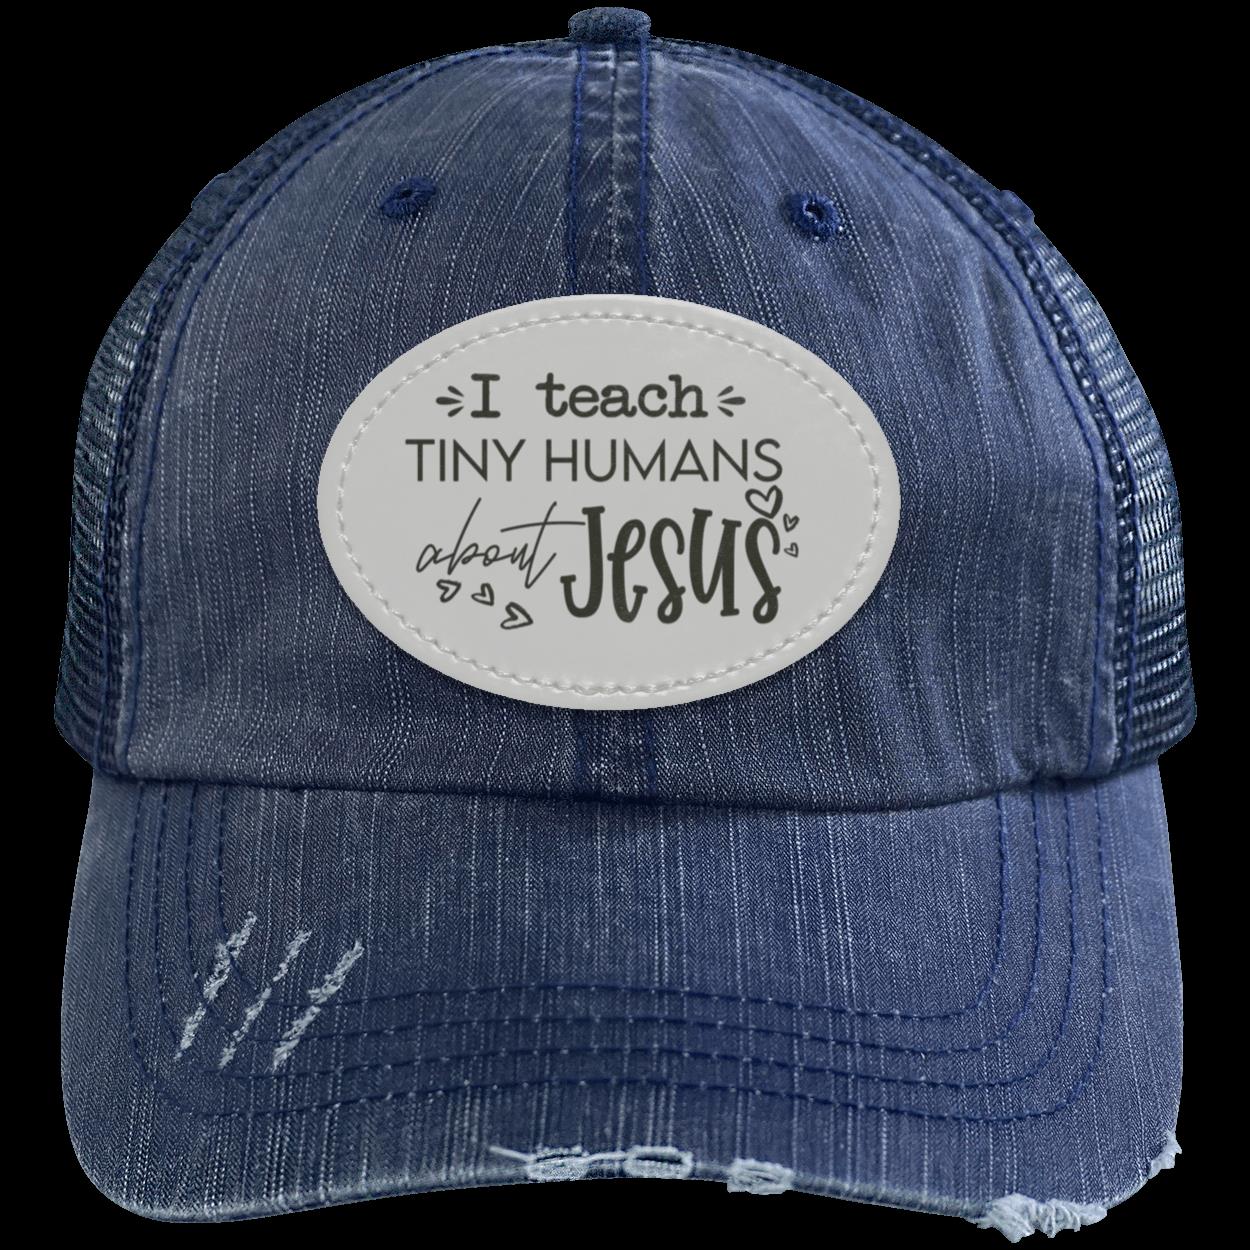 I Teach Tiny Humans About Jesus Distressed Unstructured Trucker Cap - Patch | Christian School Teacher Hat | Sunday School Teacher Hat